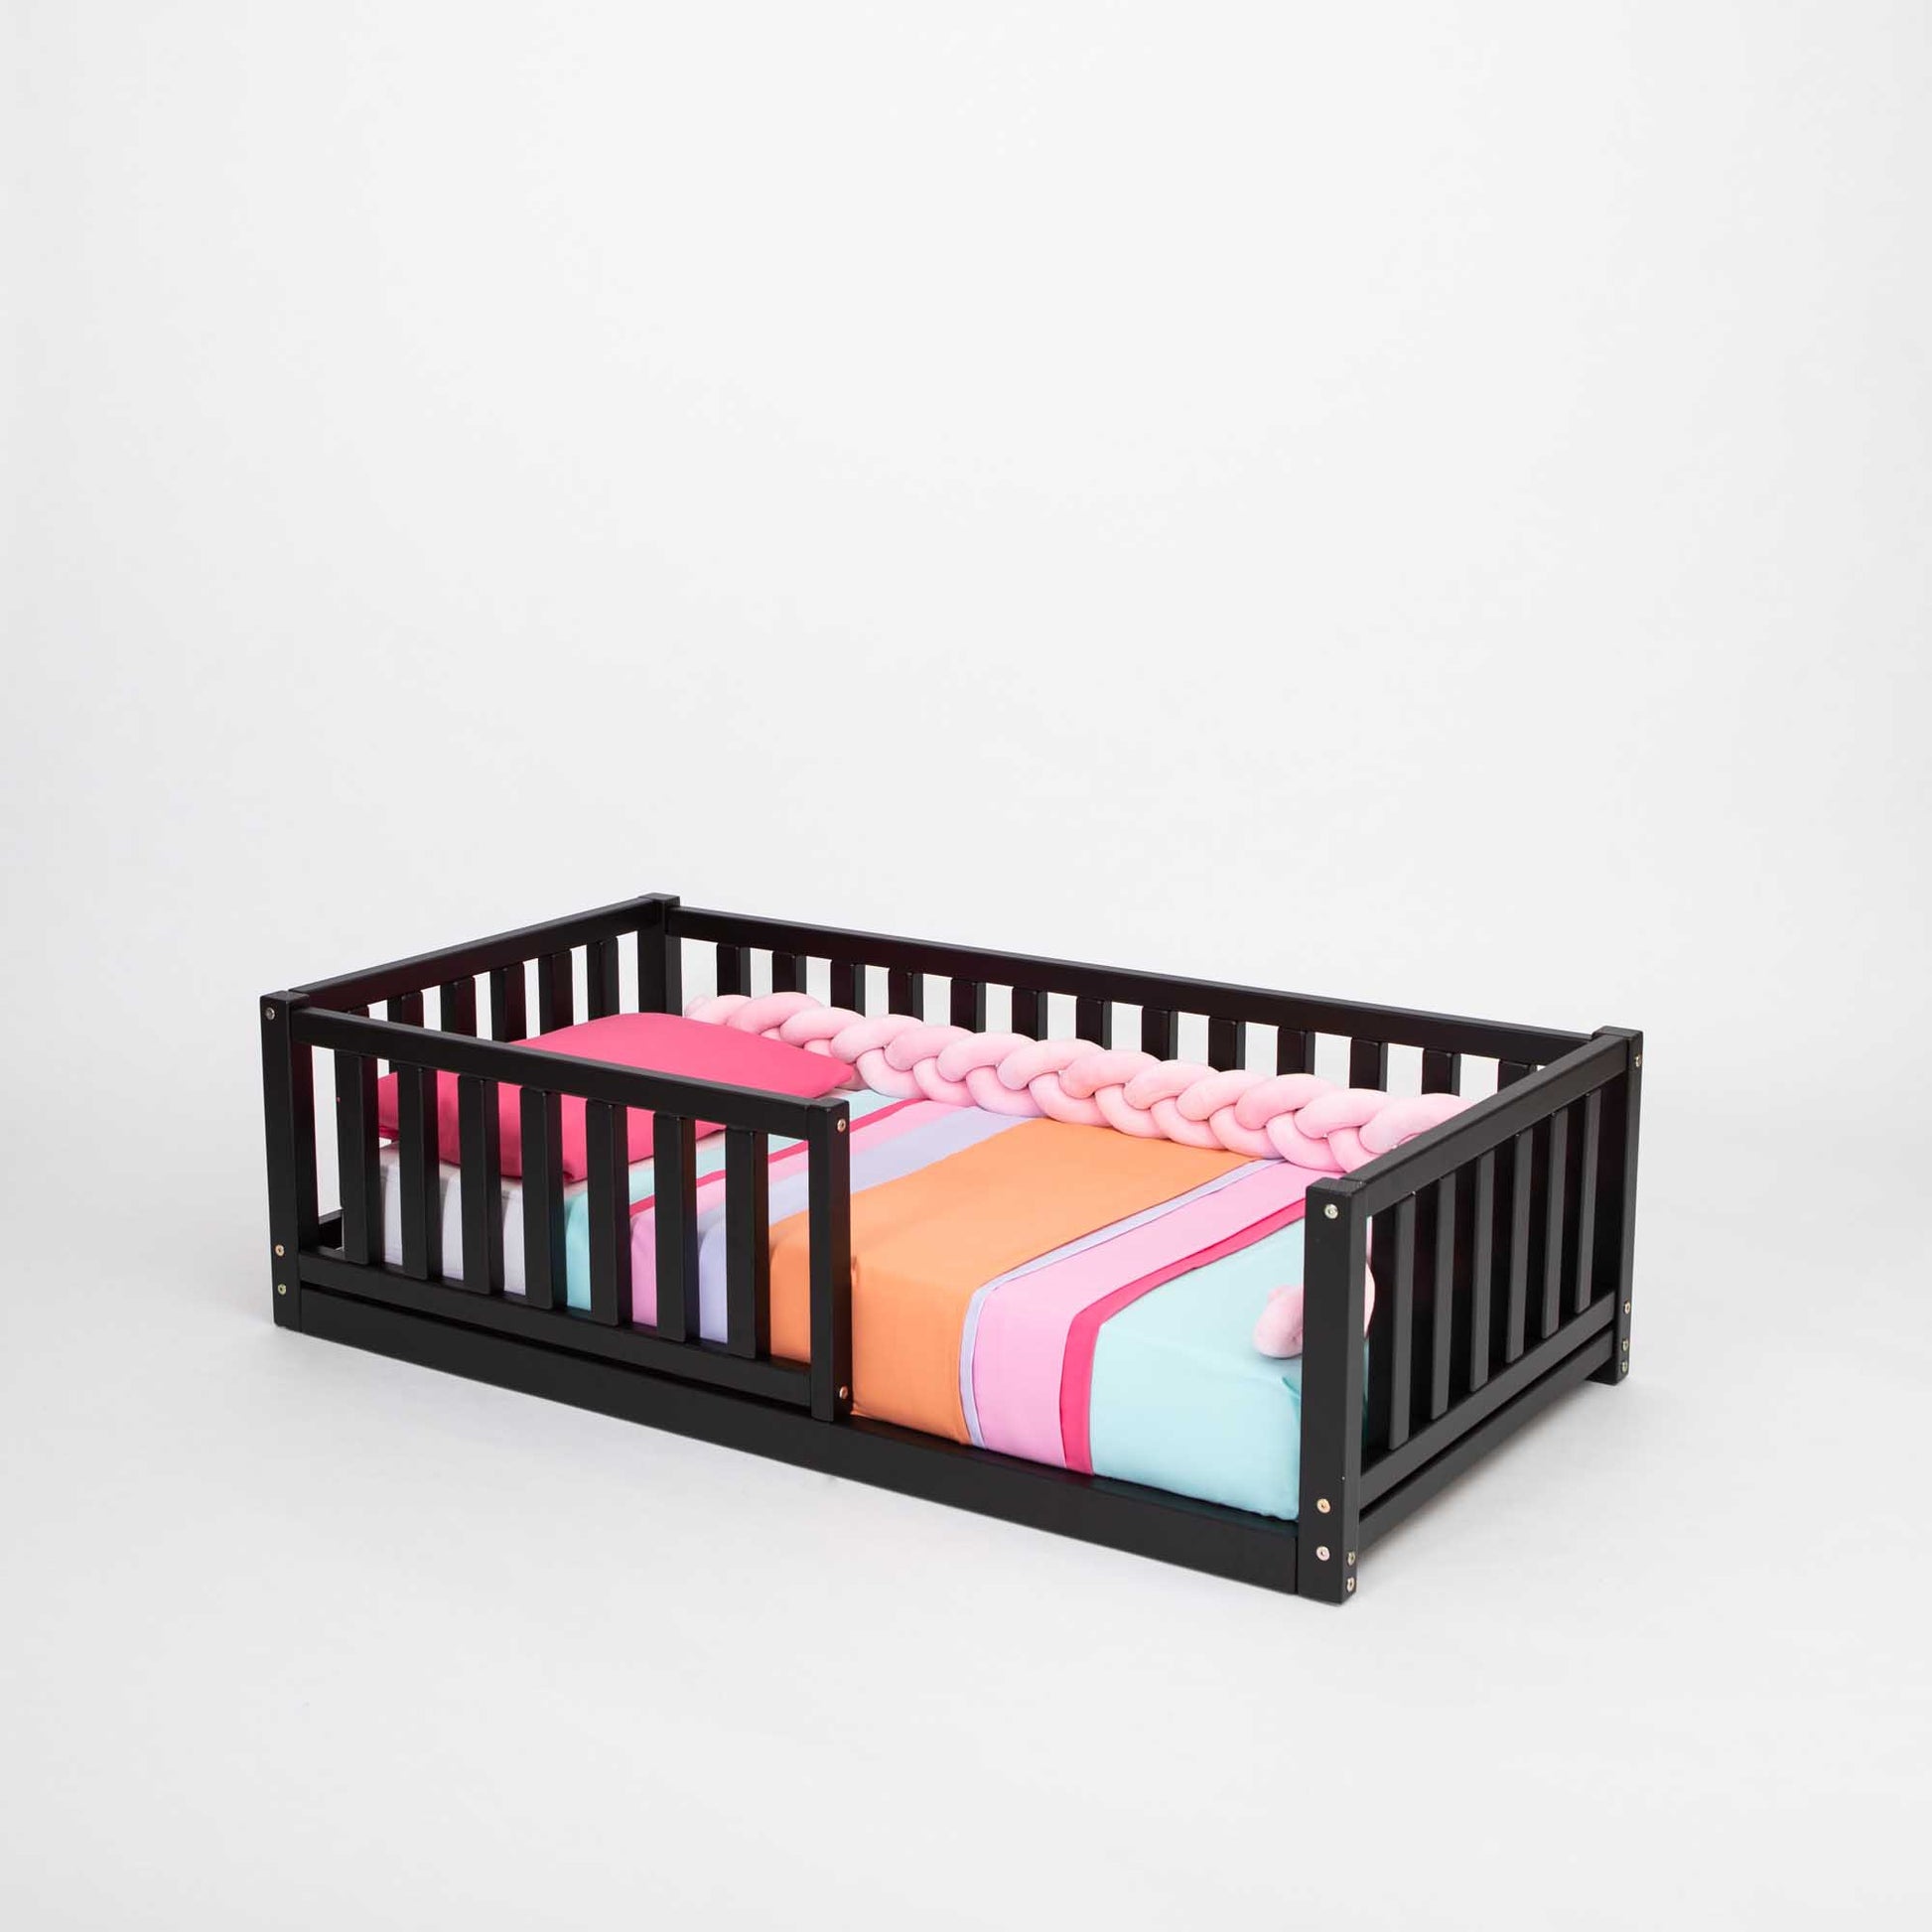 An independent Montessori kids' bed with a fence made of solid wood and provided by Sweet Home From Wood, with a colorful blanket on top, providing both security and comfort.